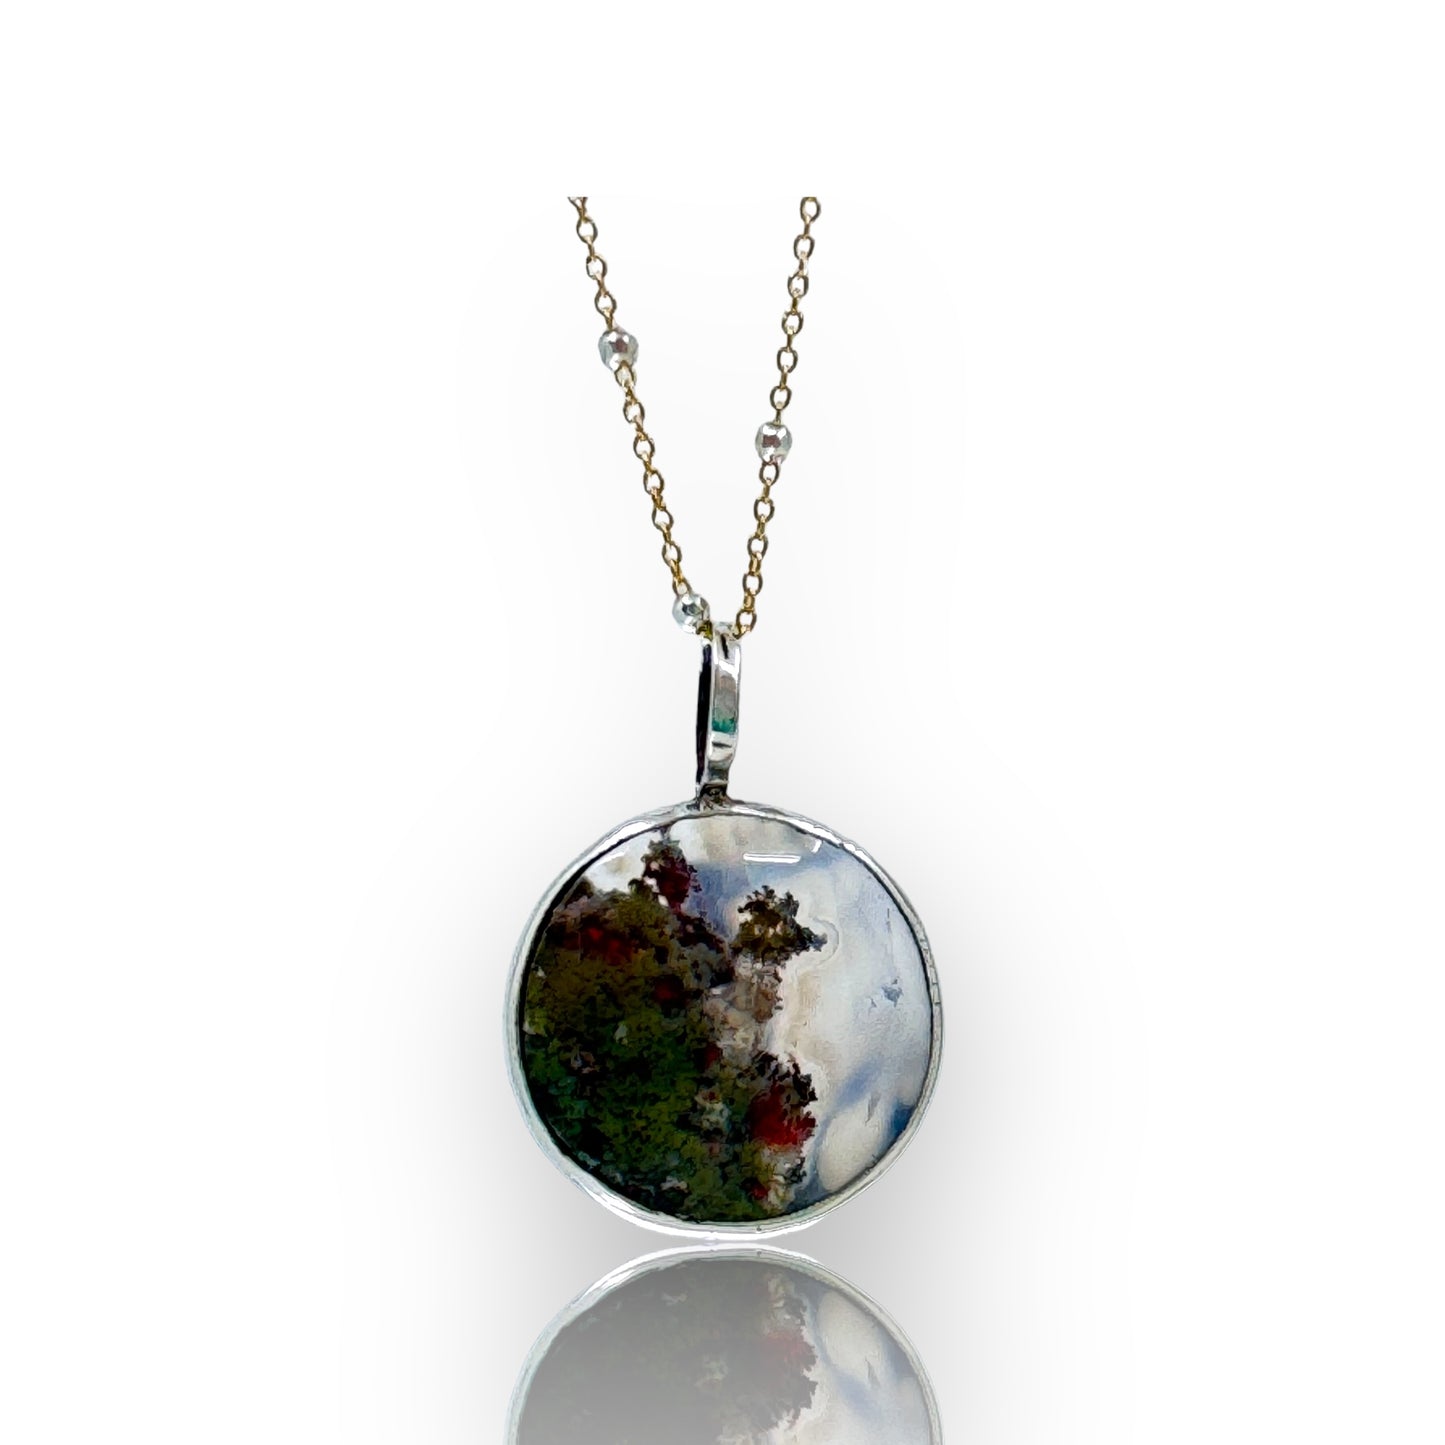 Heron Agate Necklace